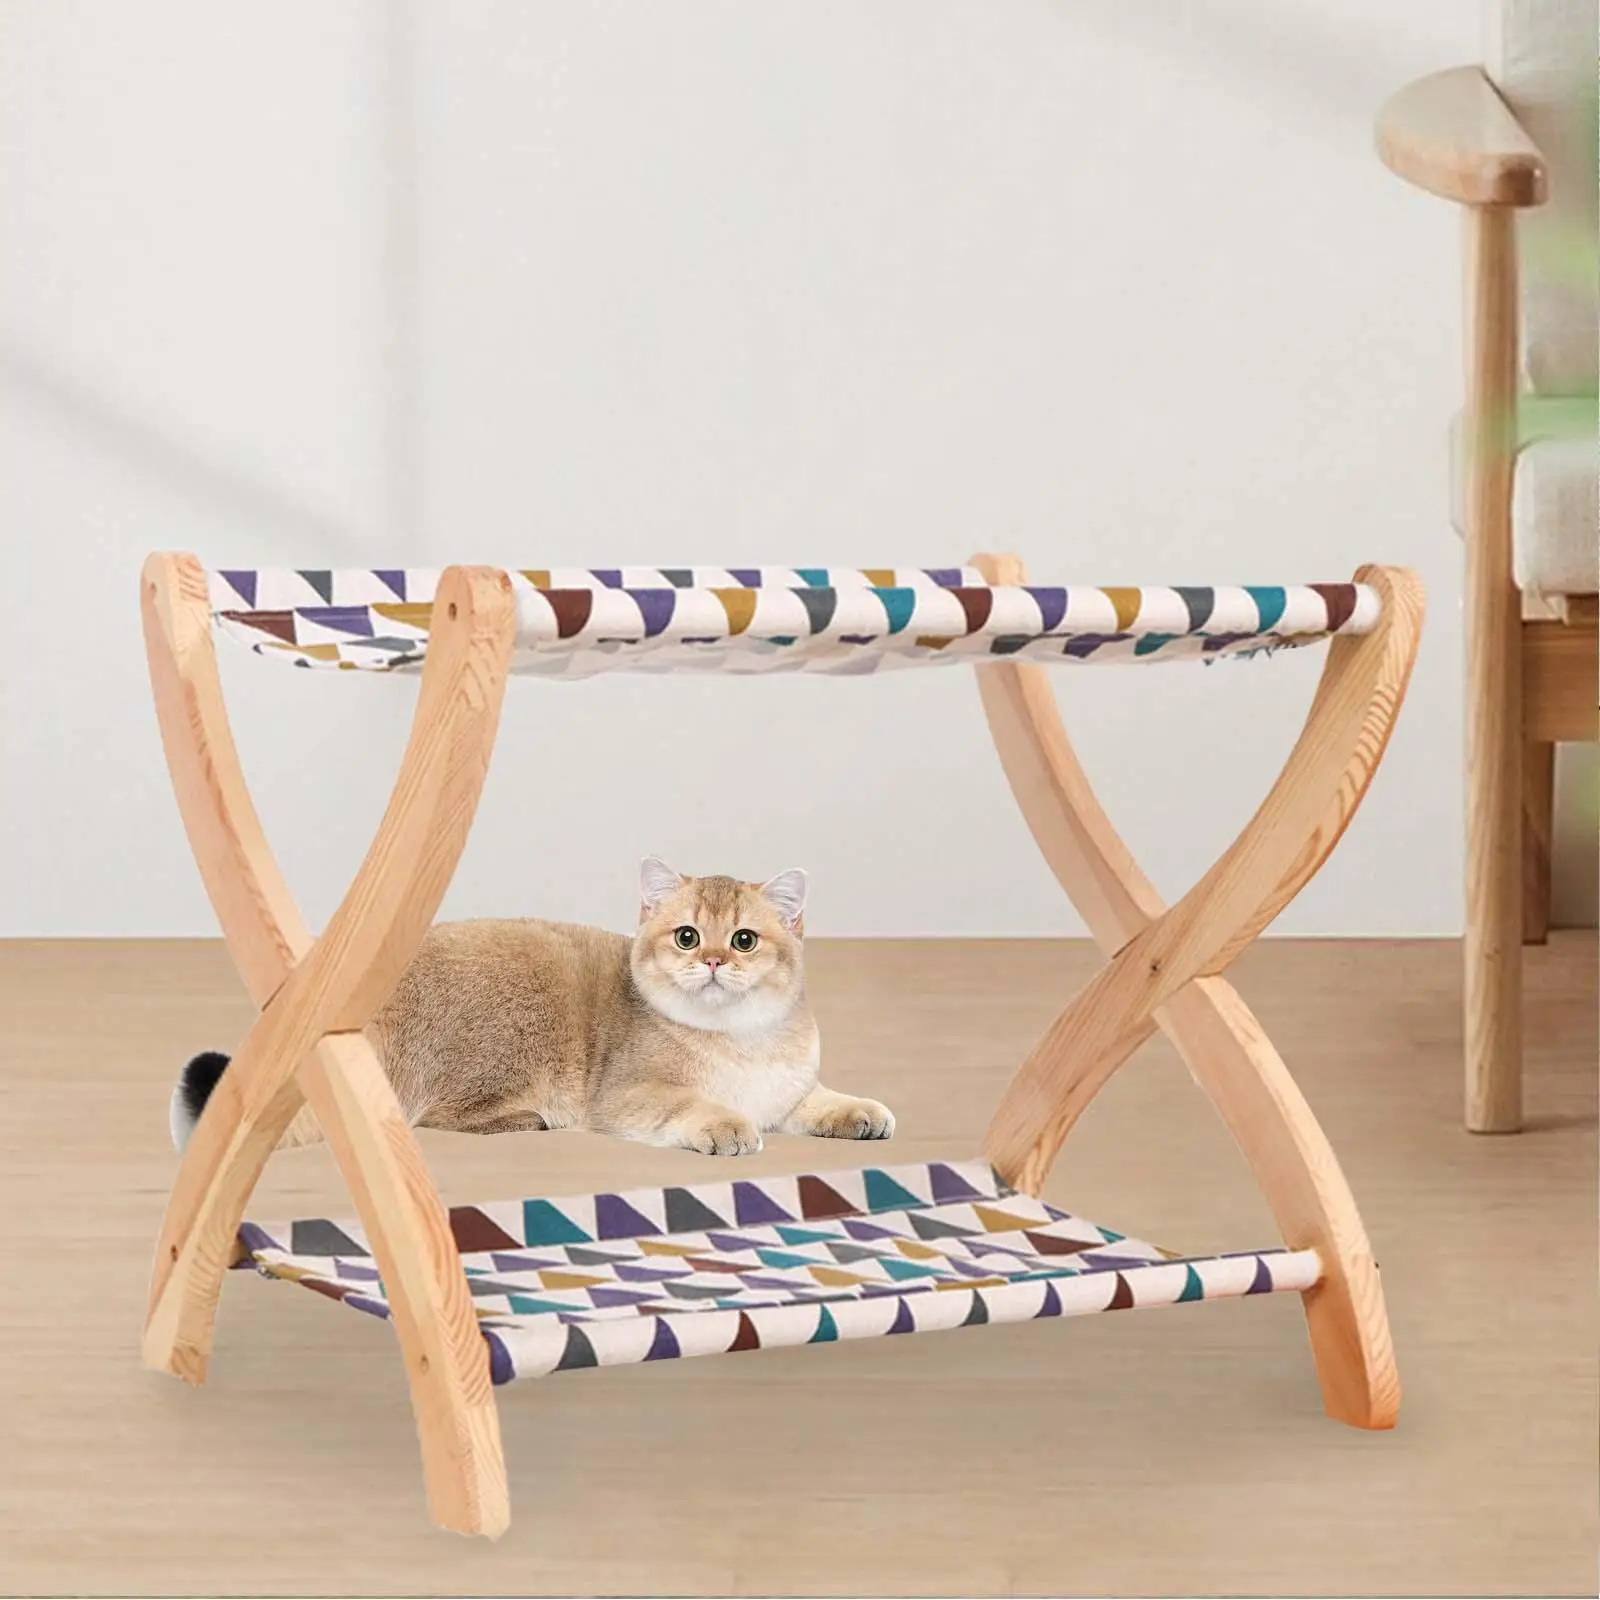 Double Layer Cat Lounge Beds Raised Pet Beds Wooden Playing Breathable Rabbit Sleeping Kitty Small Animals Cat Scratcher House